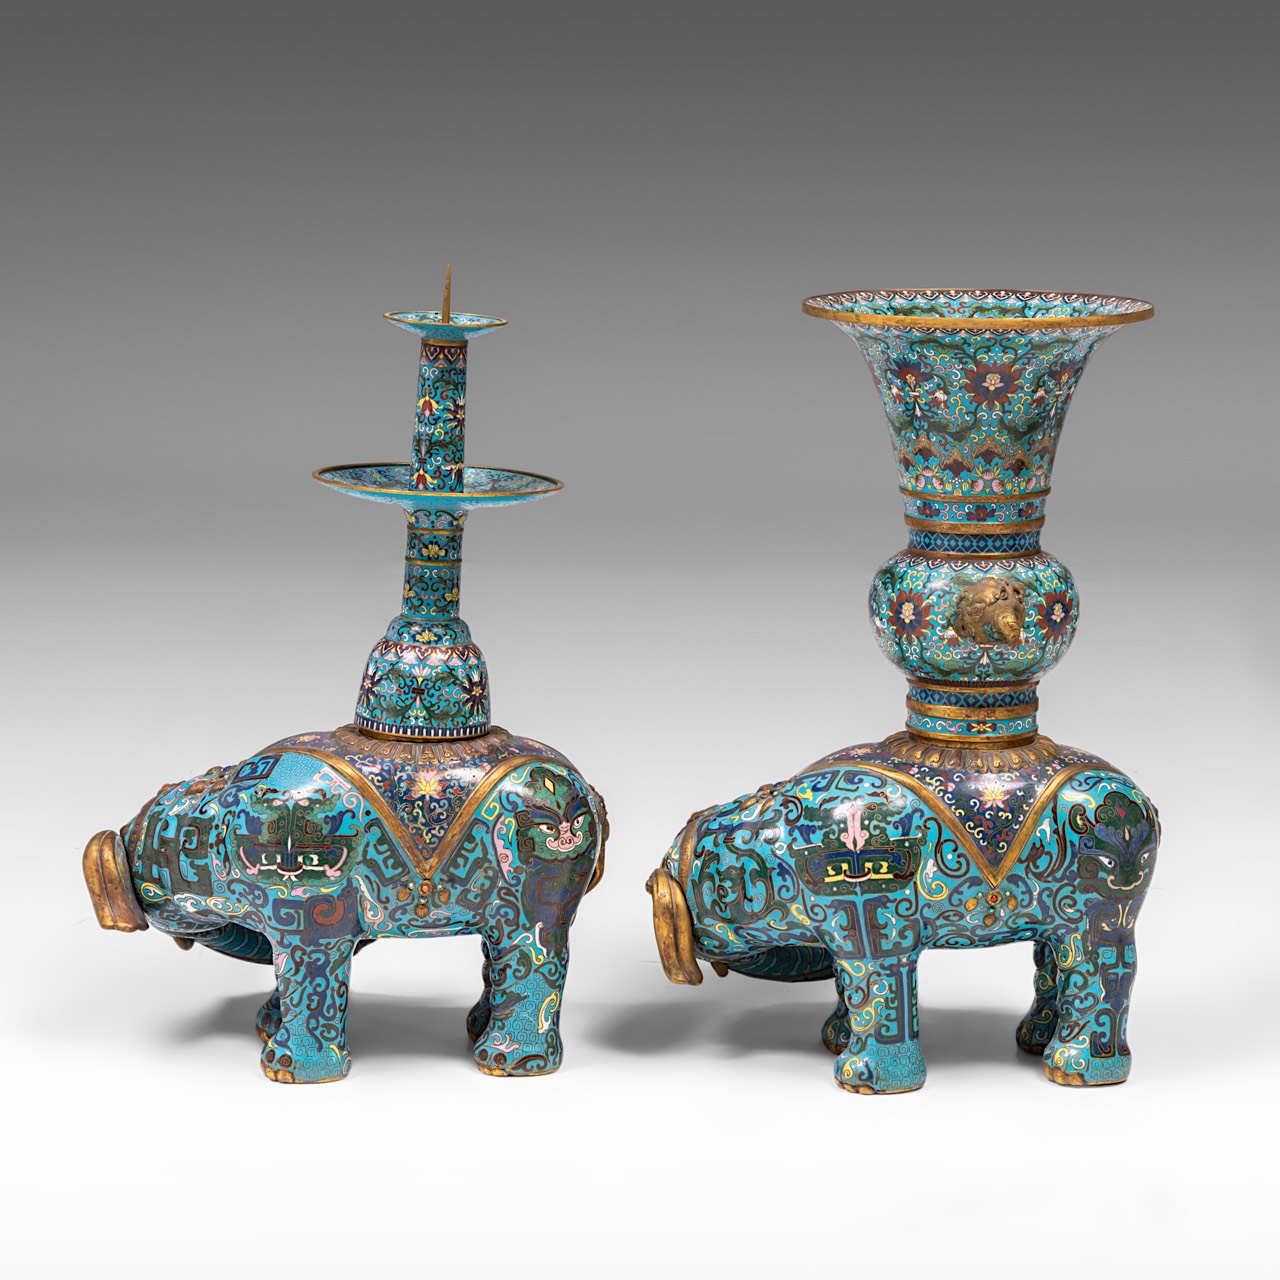 A Chinese five-piece semi-precious stone inlaid cloisonne garniture, late Qing/20thC, tallest H 58 - - Image 14 of 24